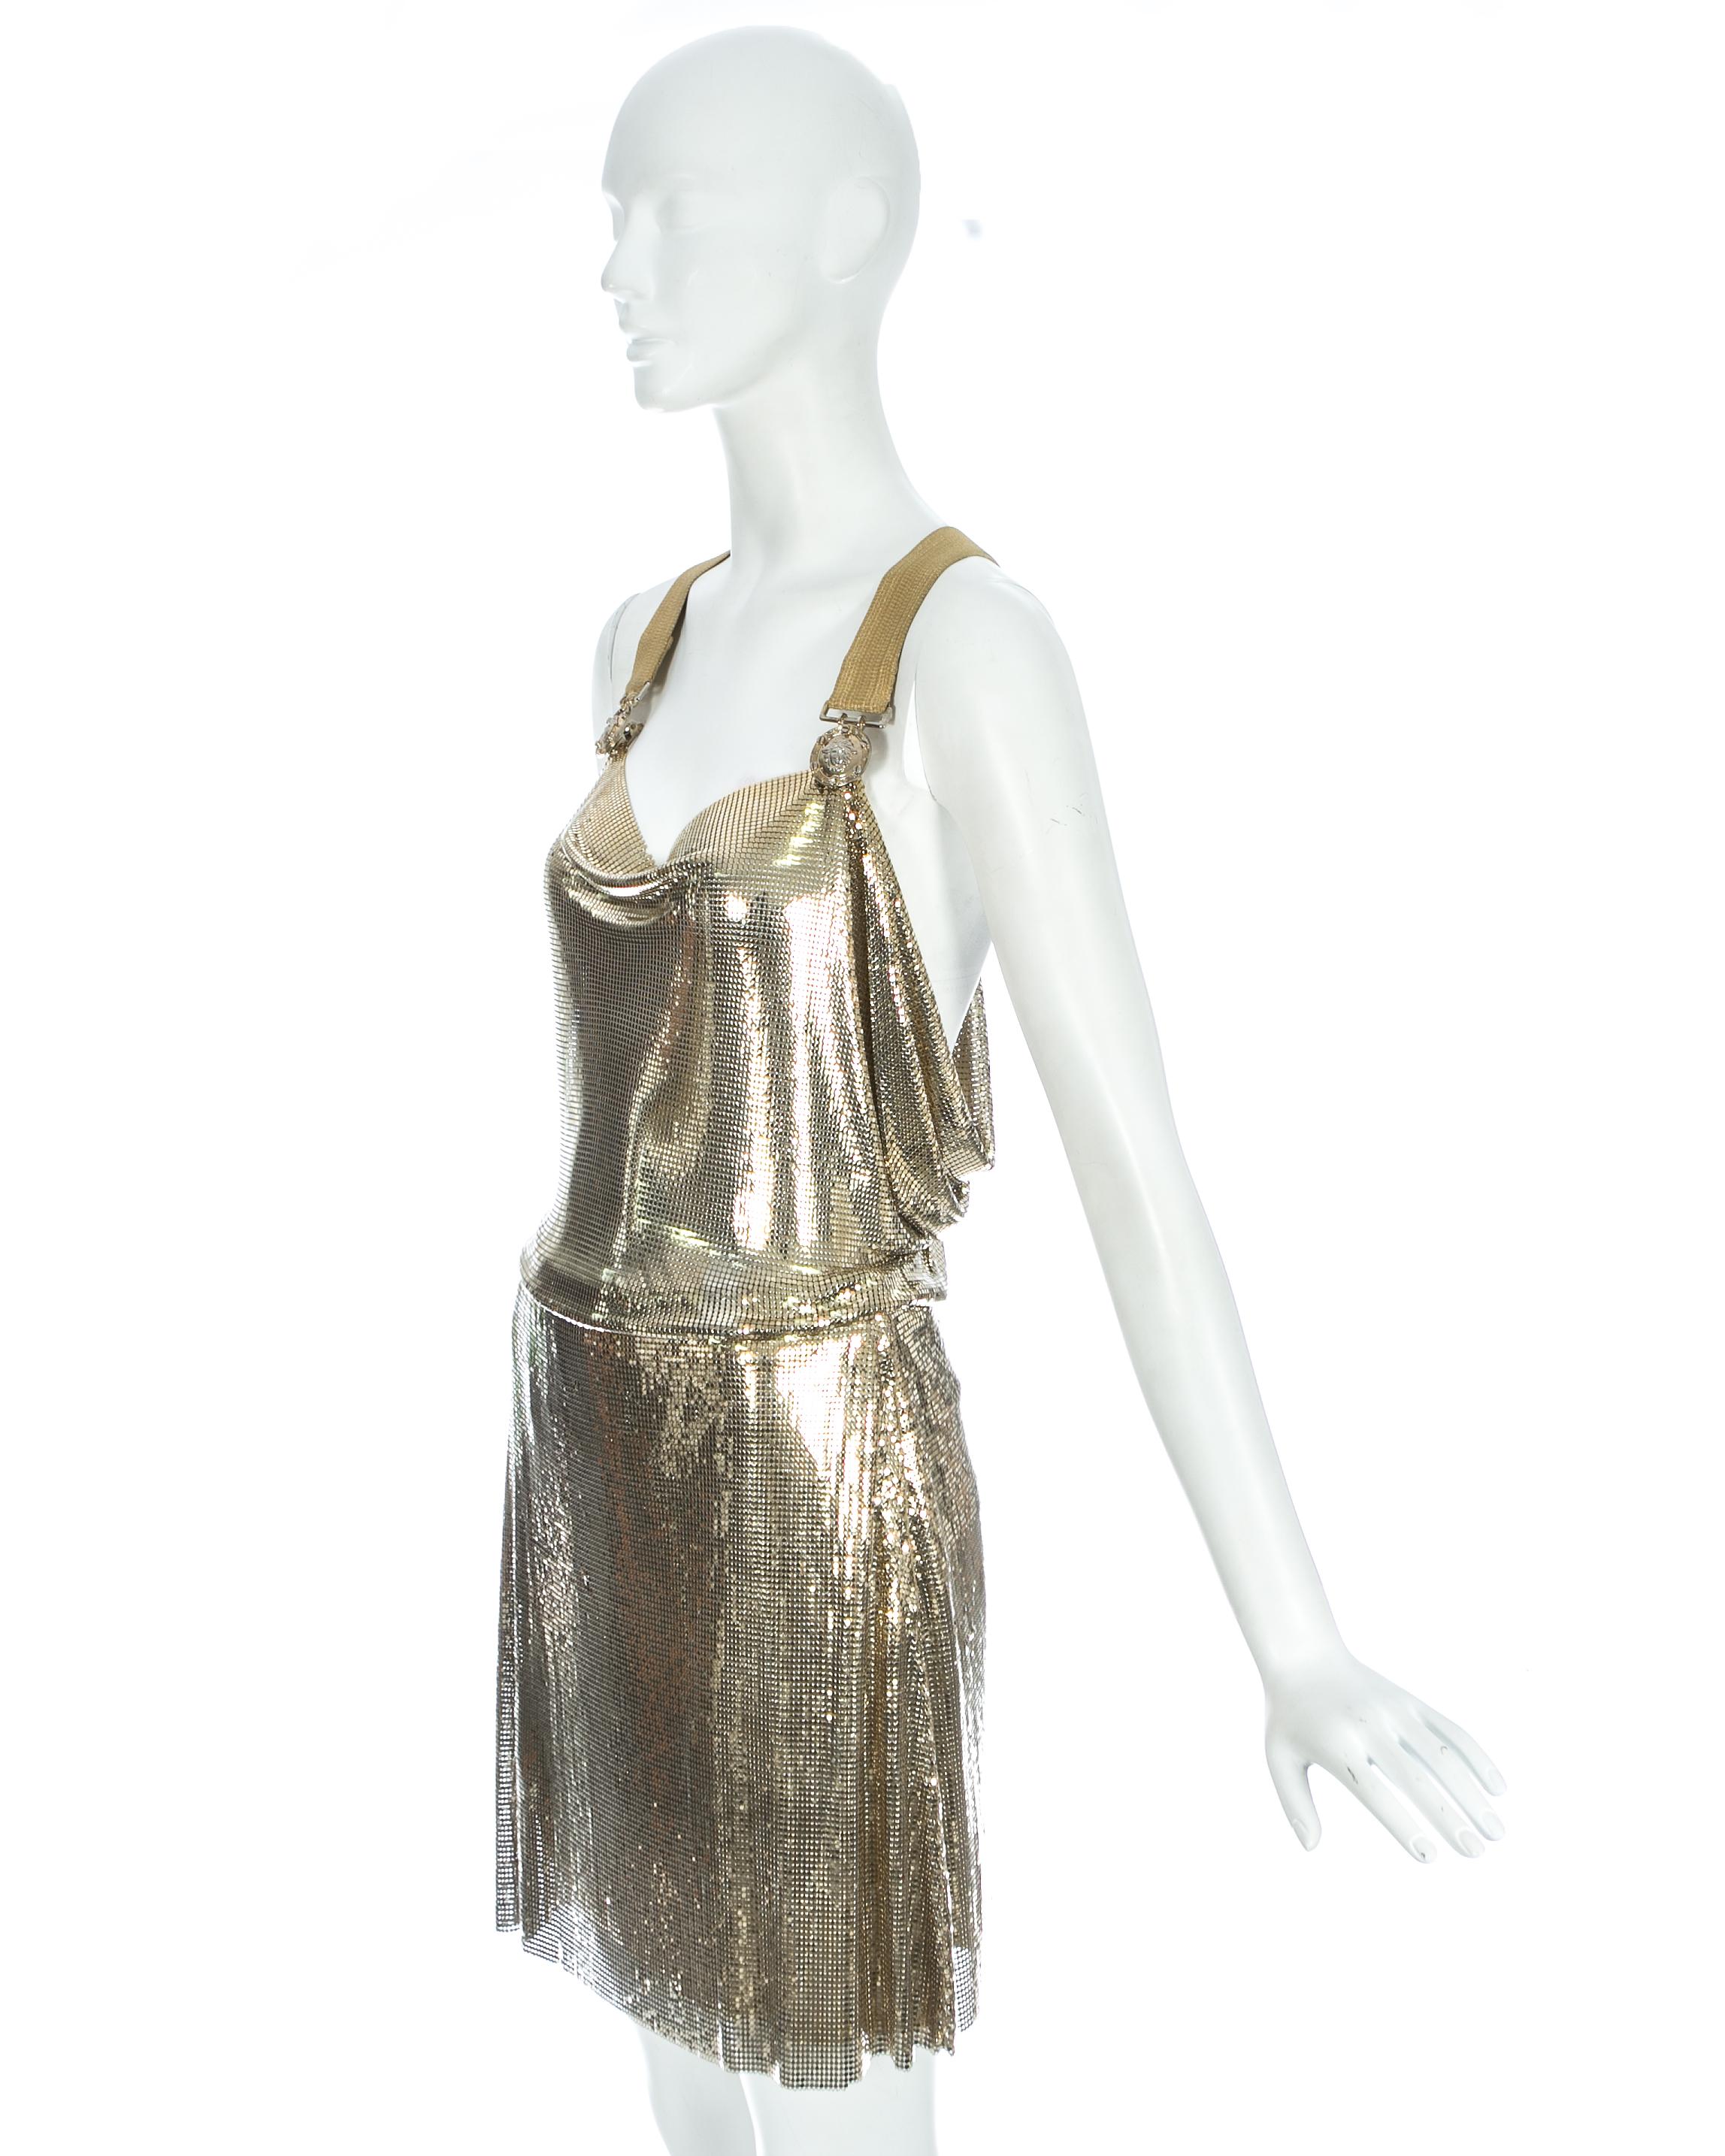 Gianni Versace gold metal mesh chainmail evening dress, fw 1994 For Sale 3